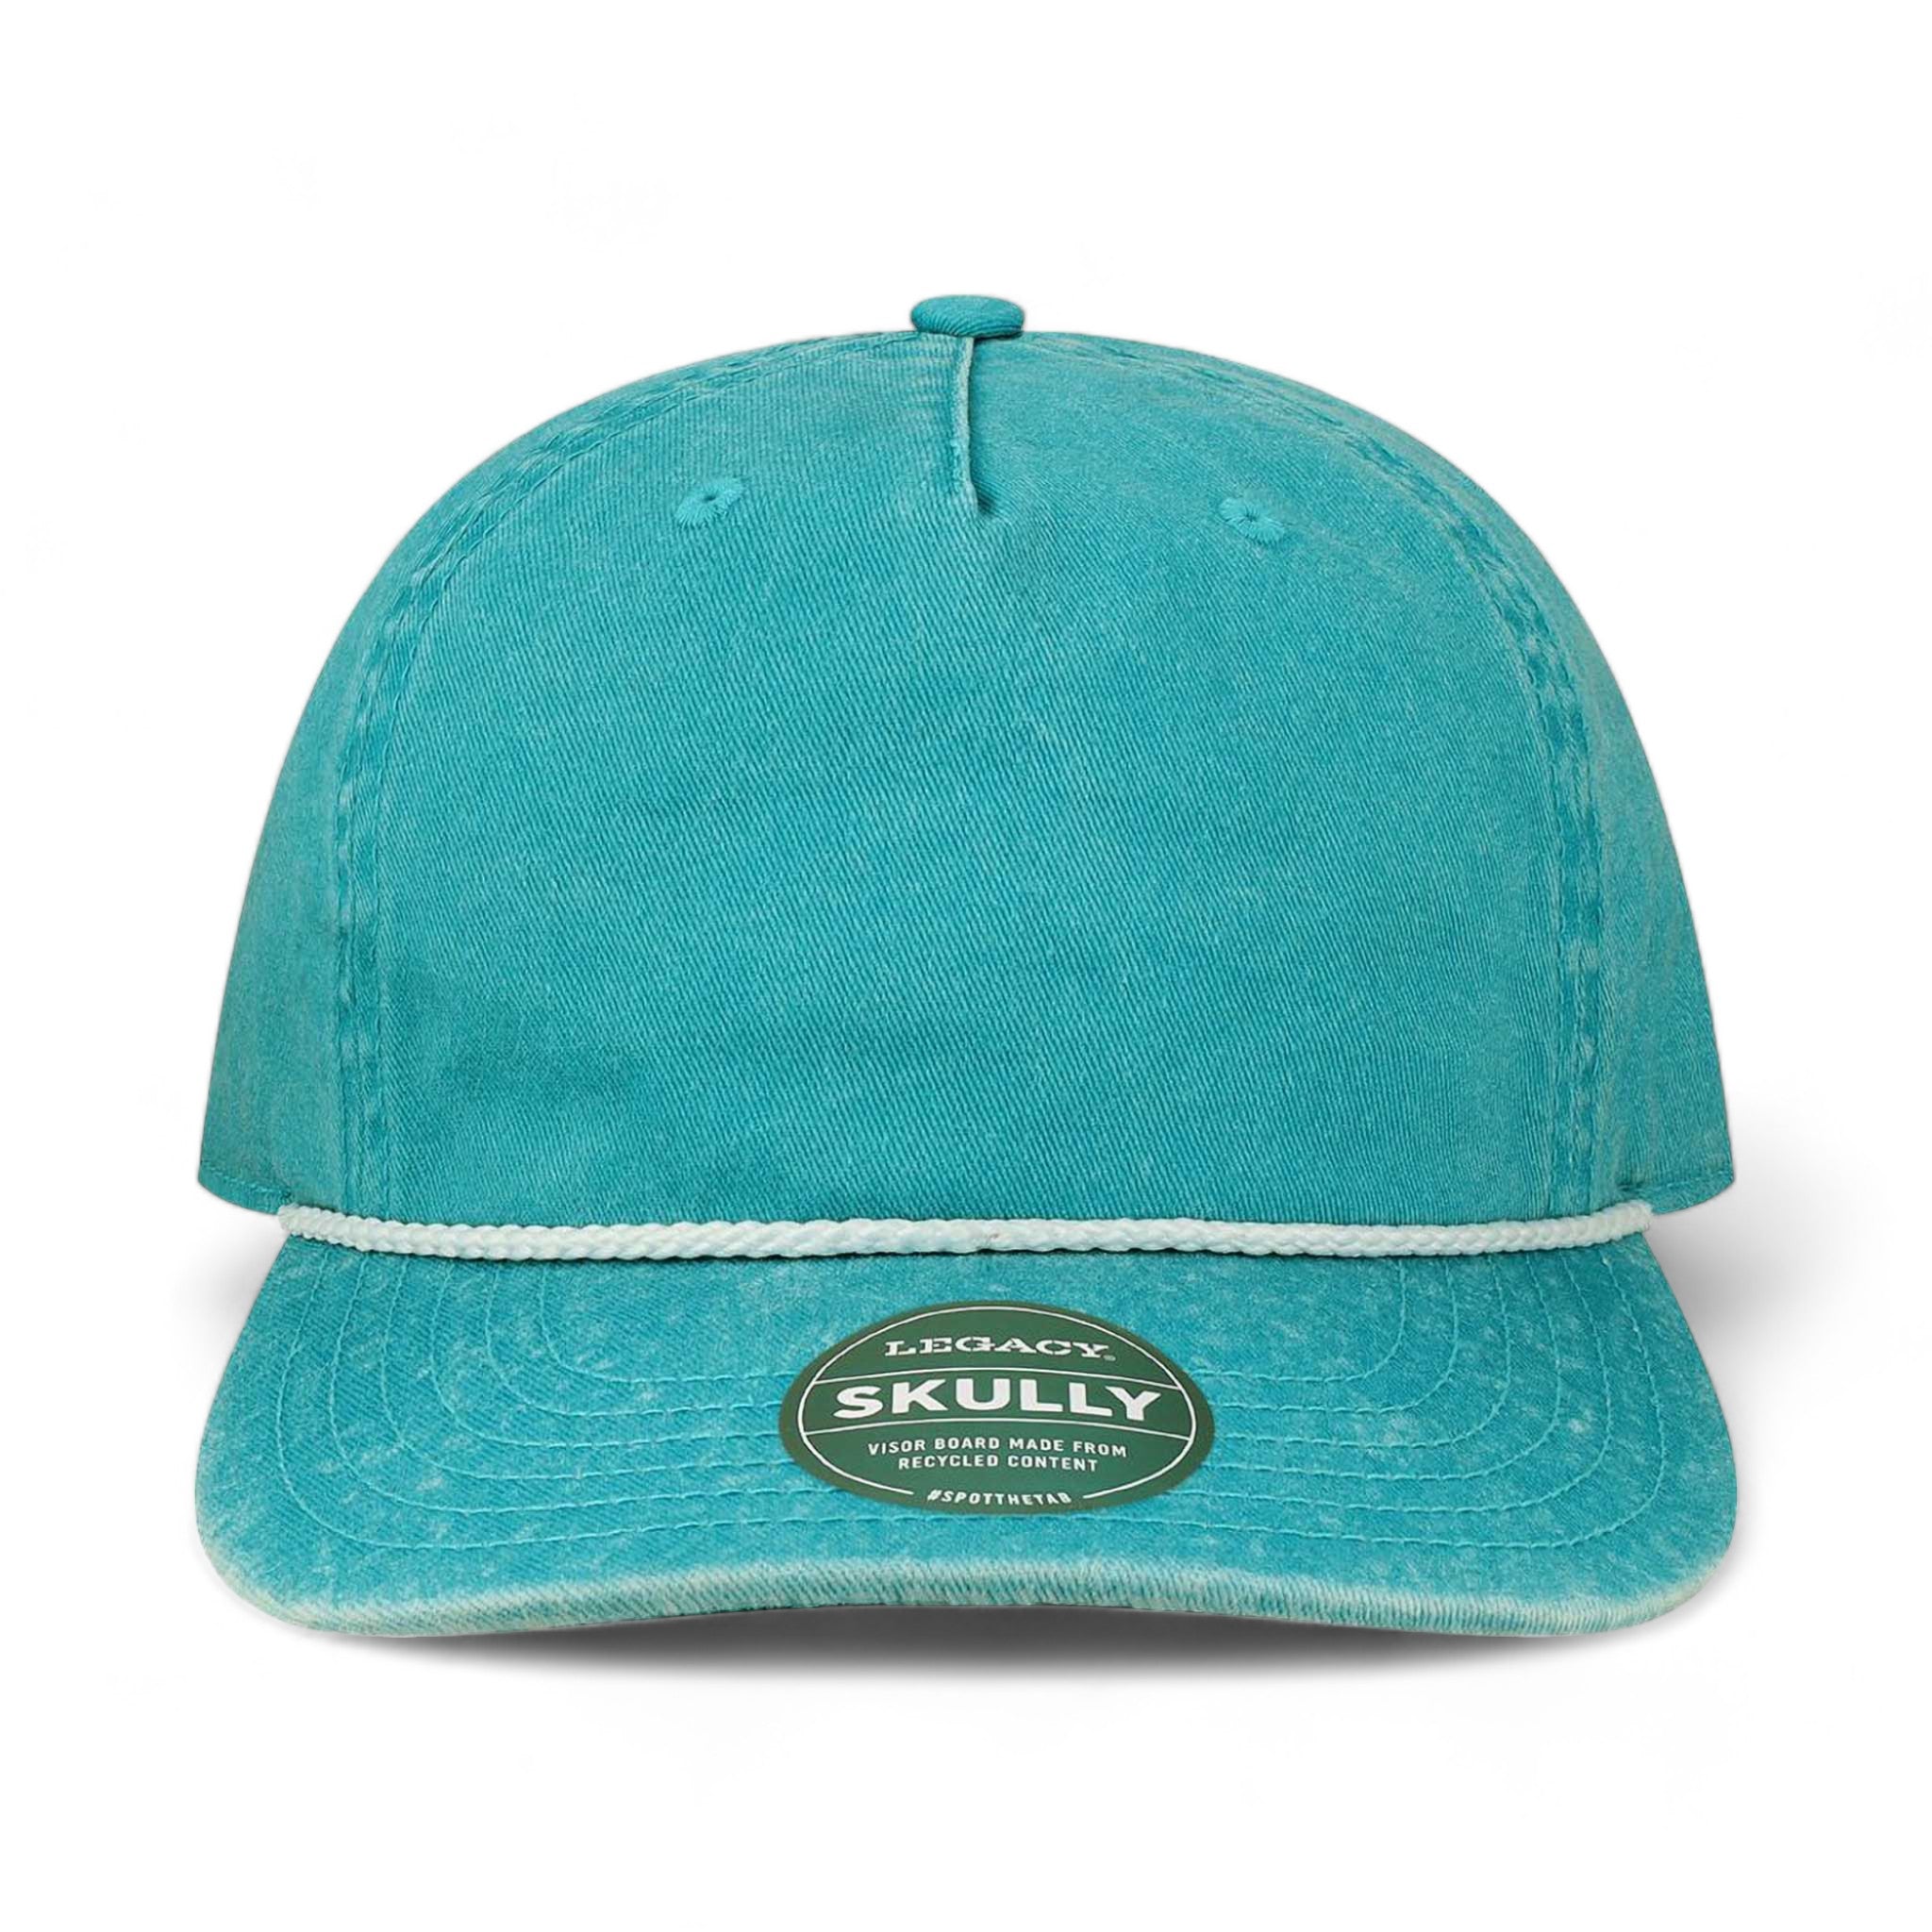 Front view of LEGACY SKULLY custom hat in aqua